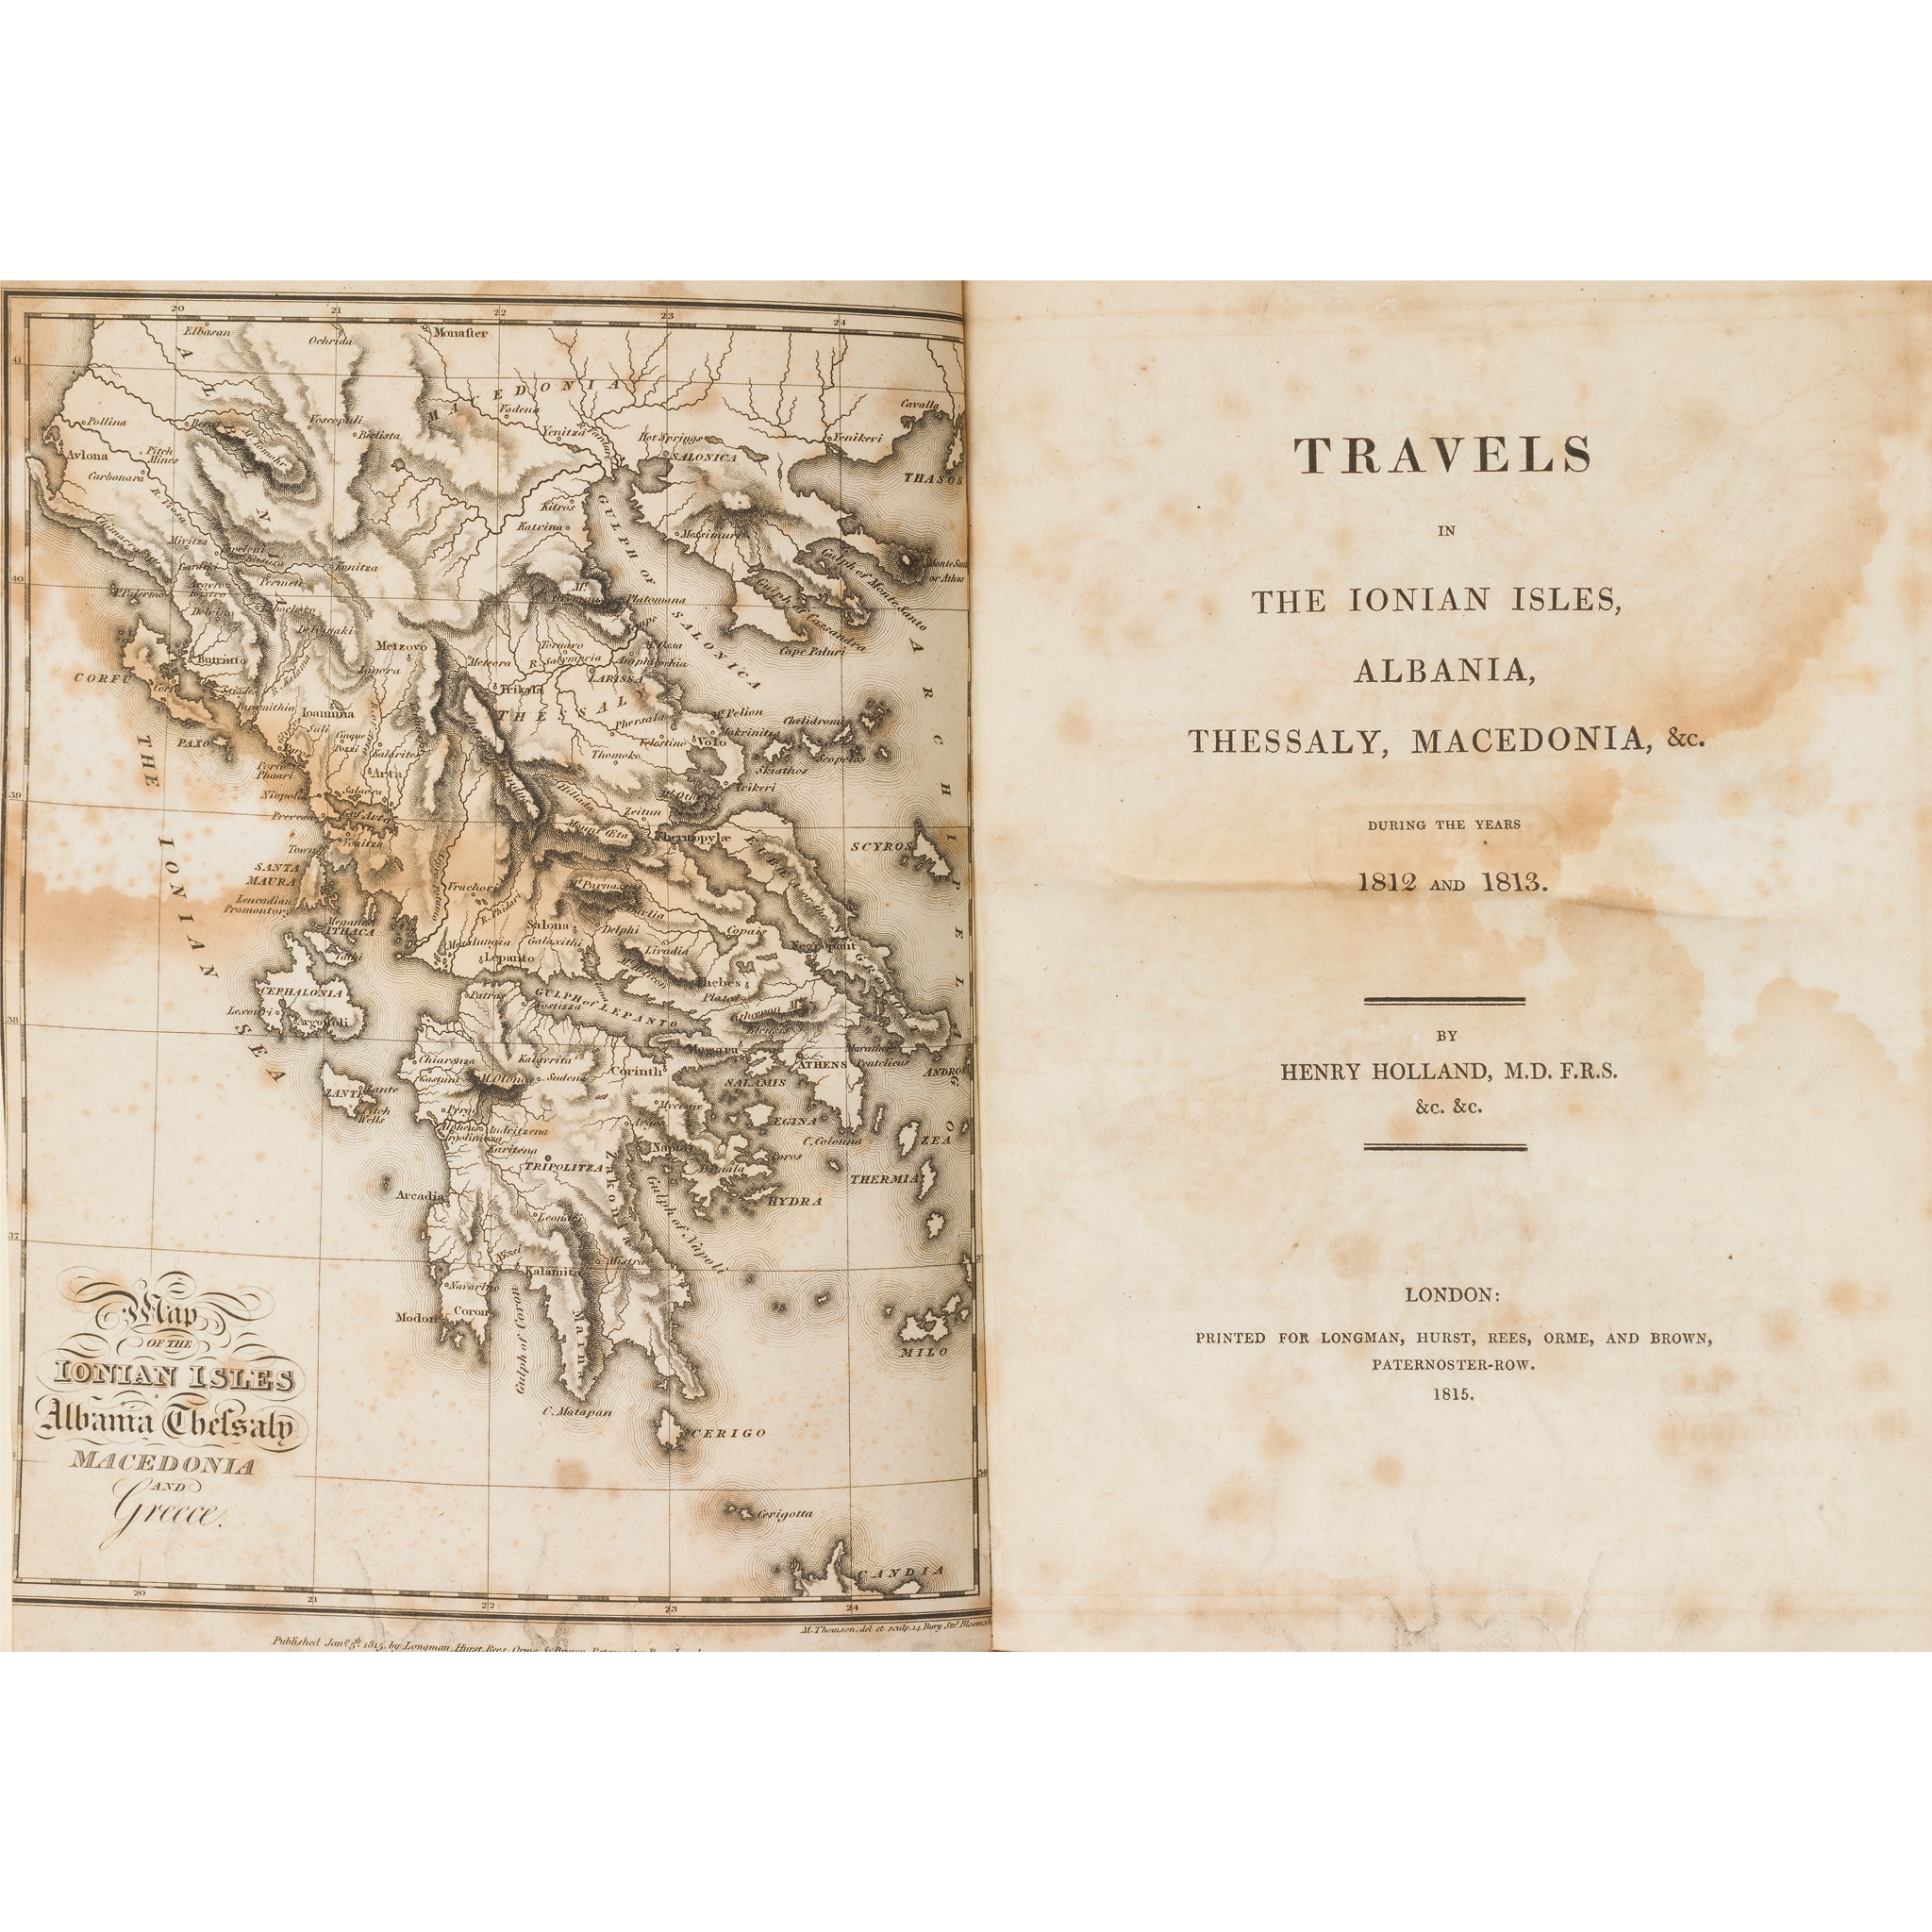 Holland, Henry Travels in the Ionian Isles, Albania, Thessaly, Macedonia &c. during the years 1812